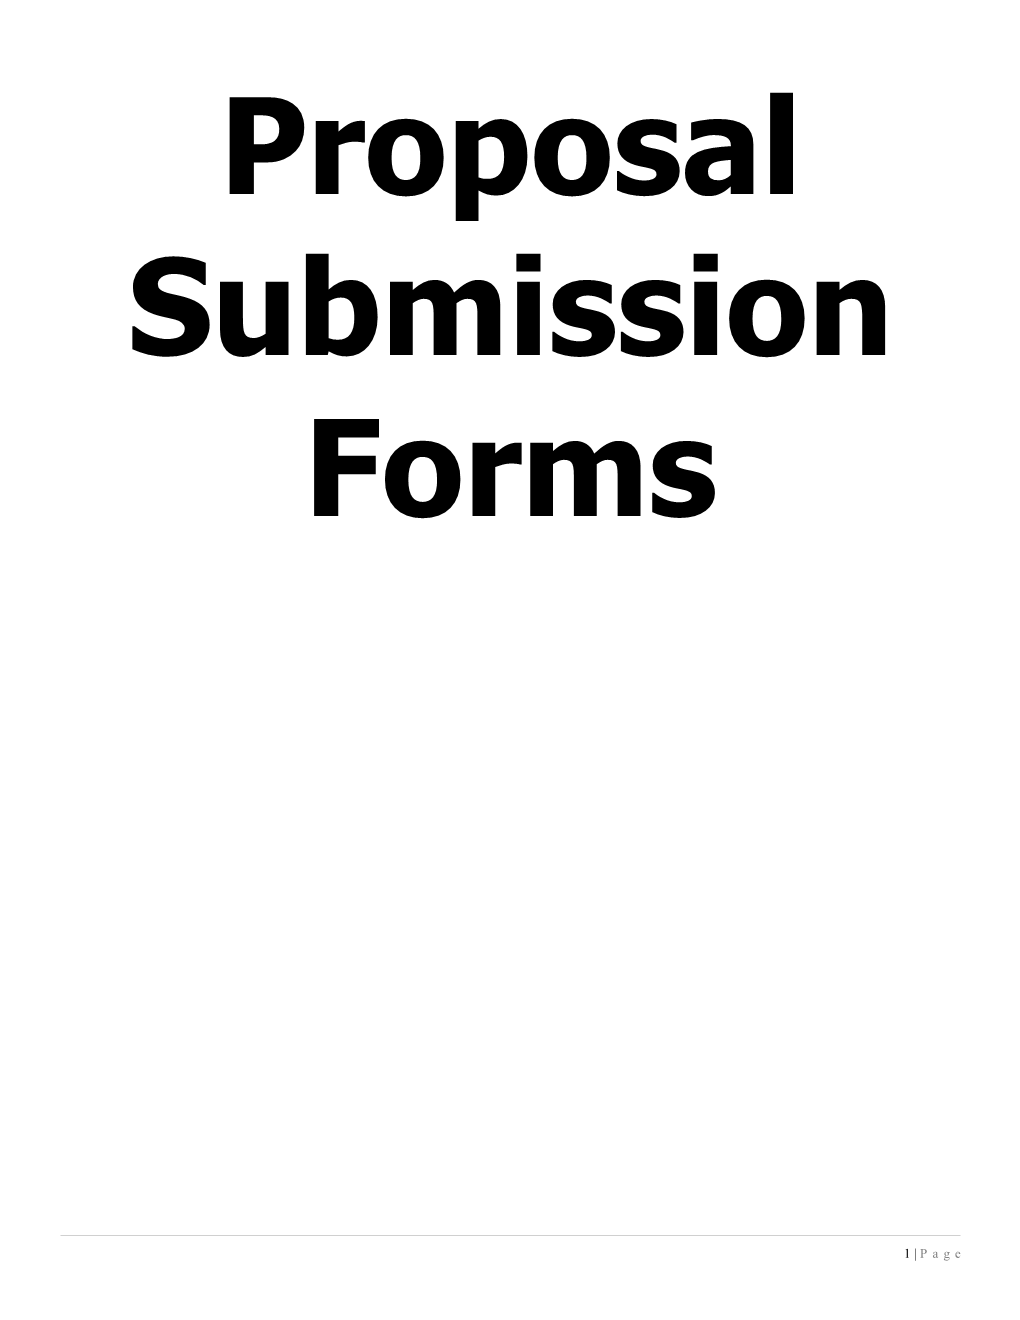 Request for Proposal Checklist